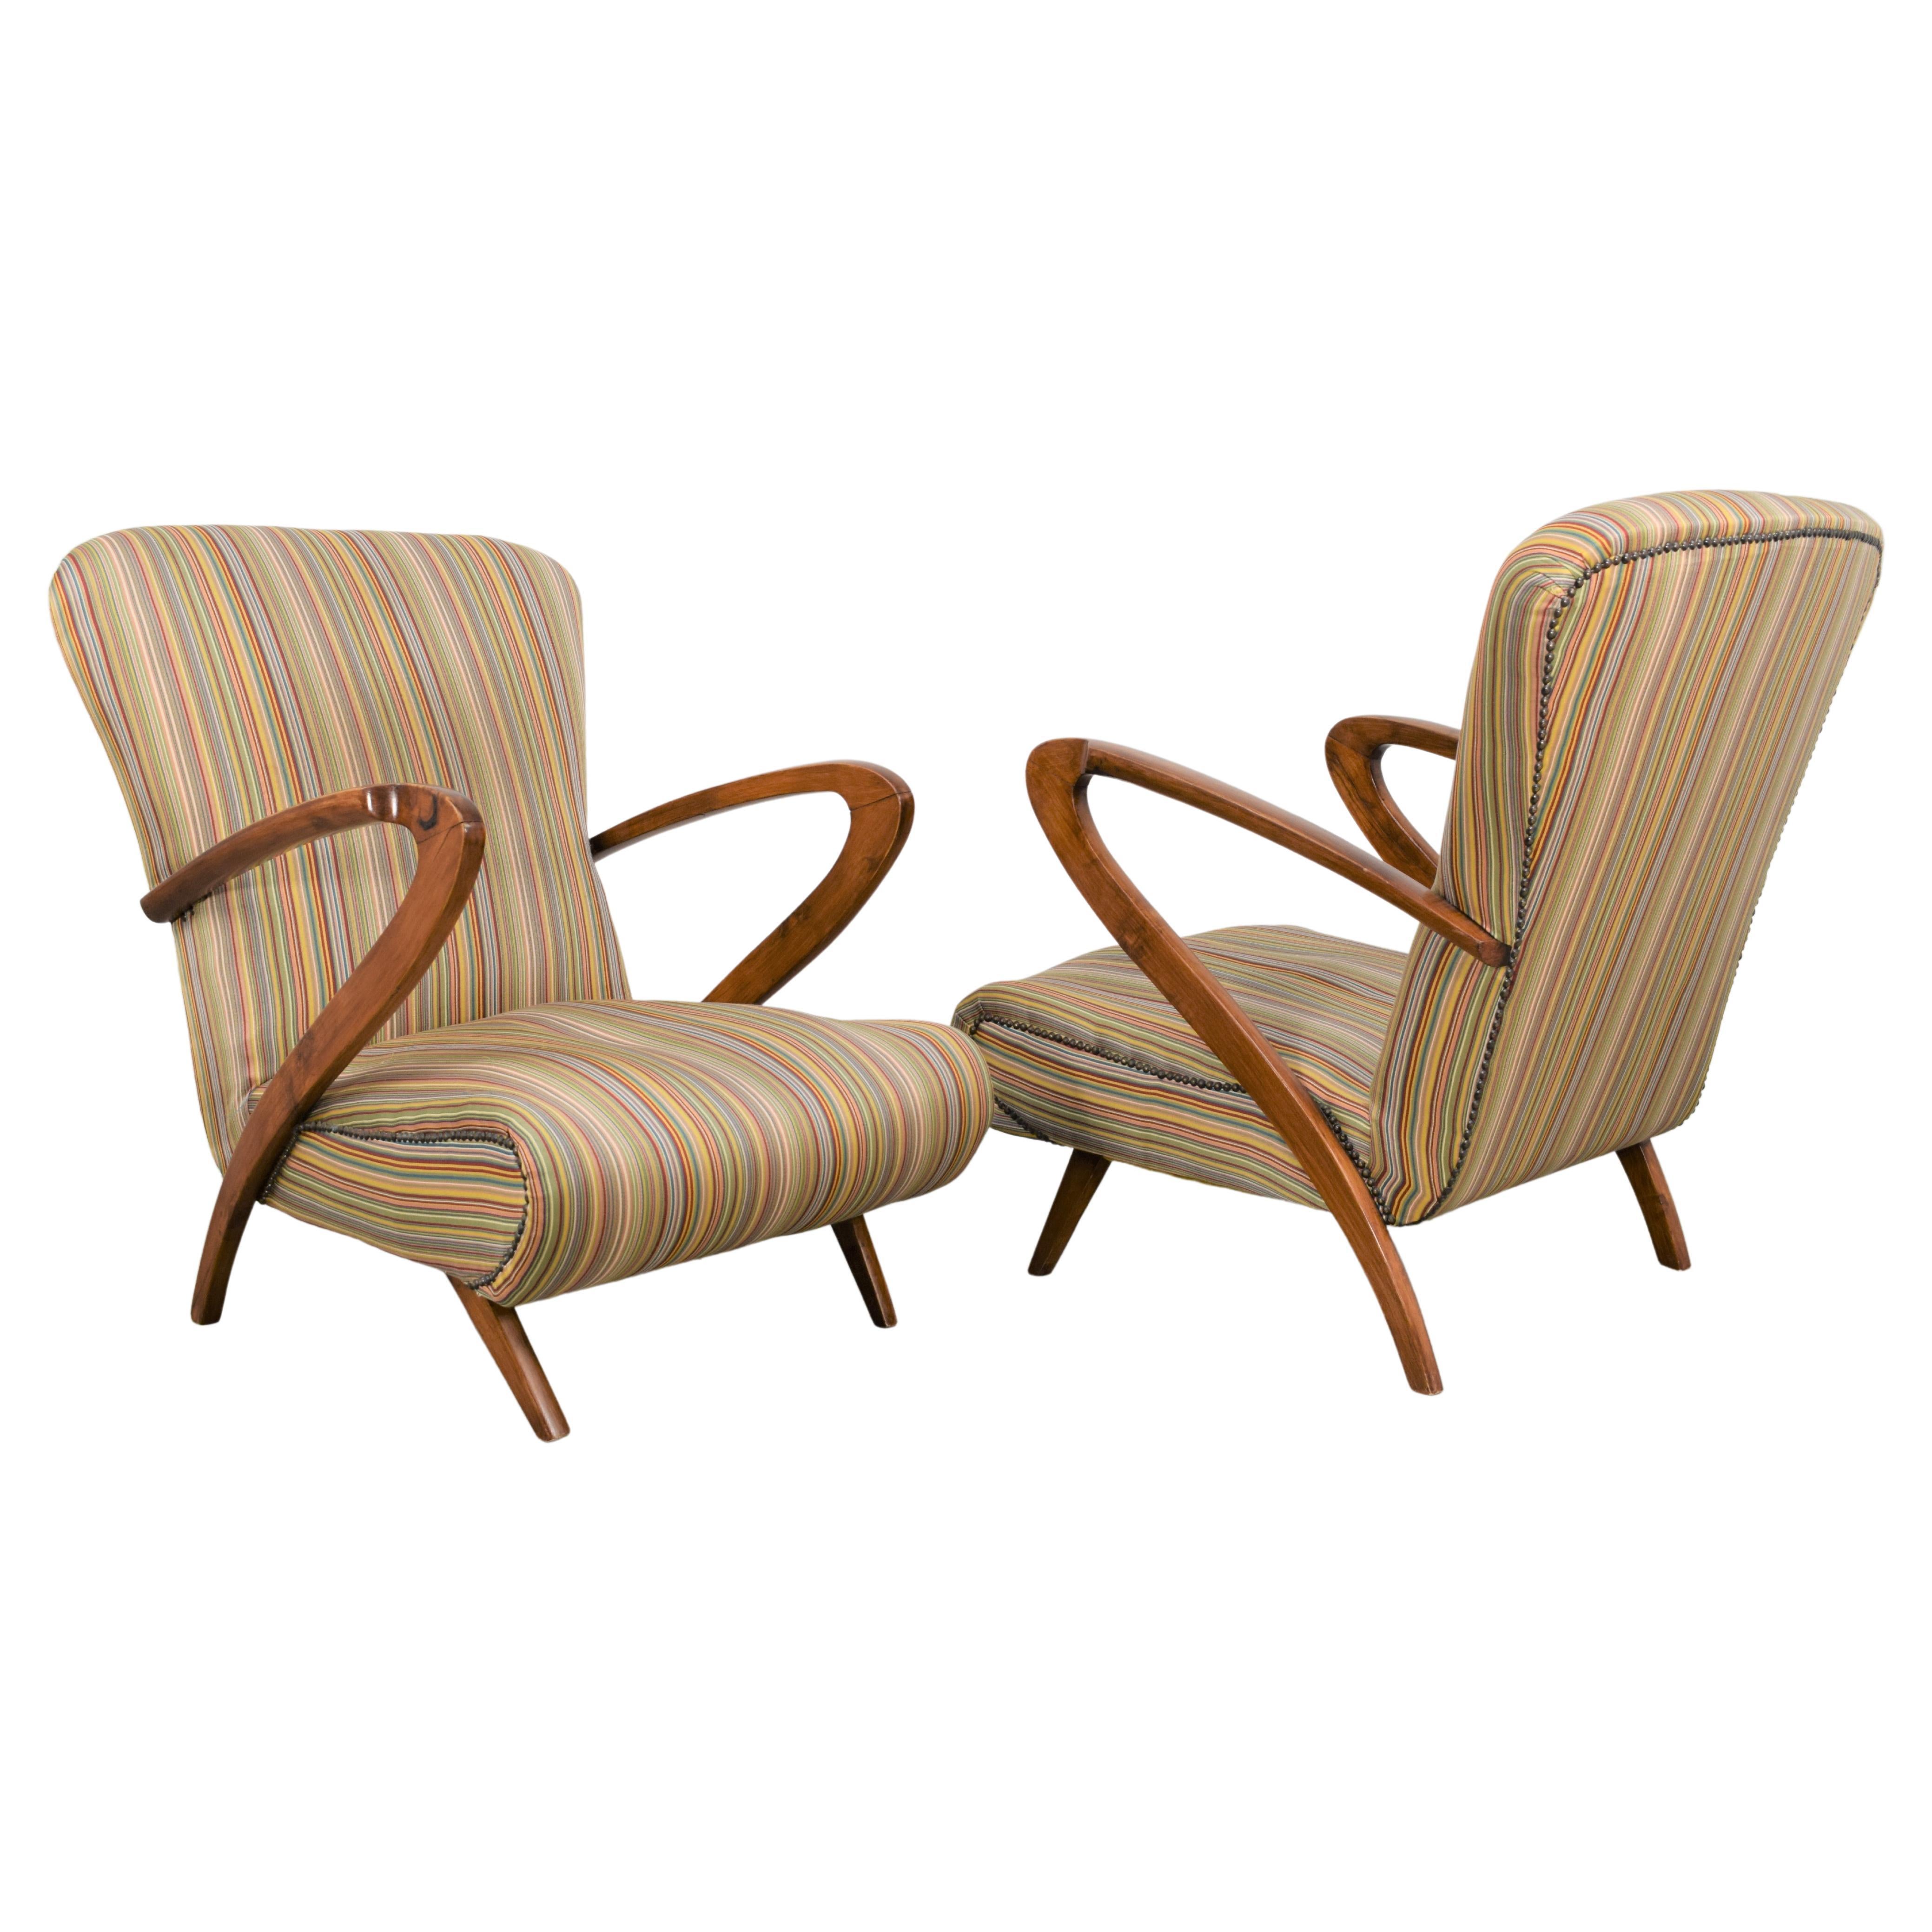 Pair of Armchairs, Guglielmo Ulrich Style, 1950s